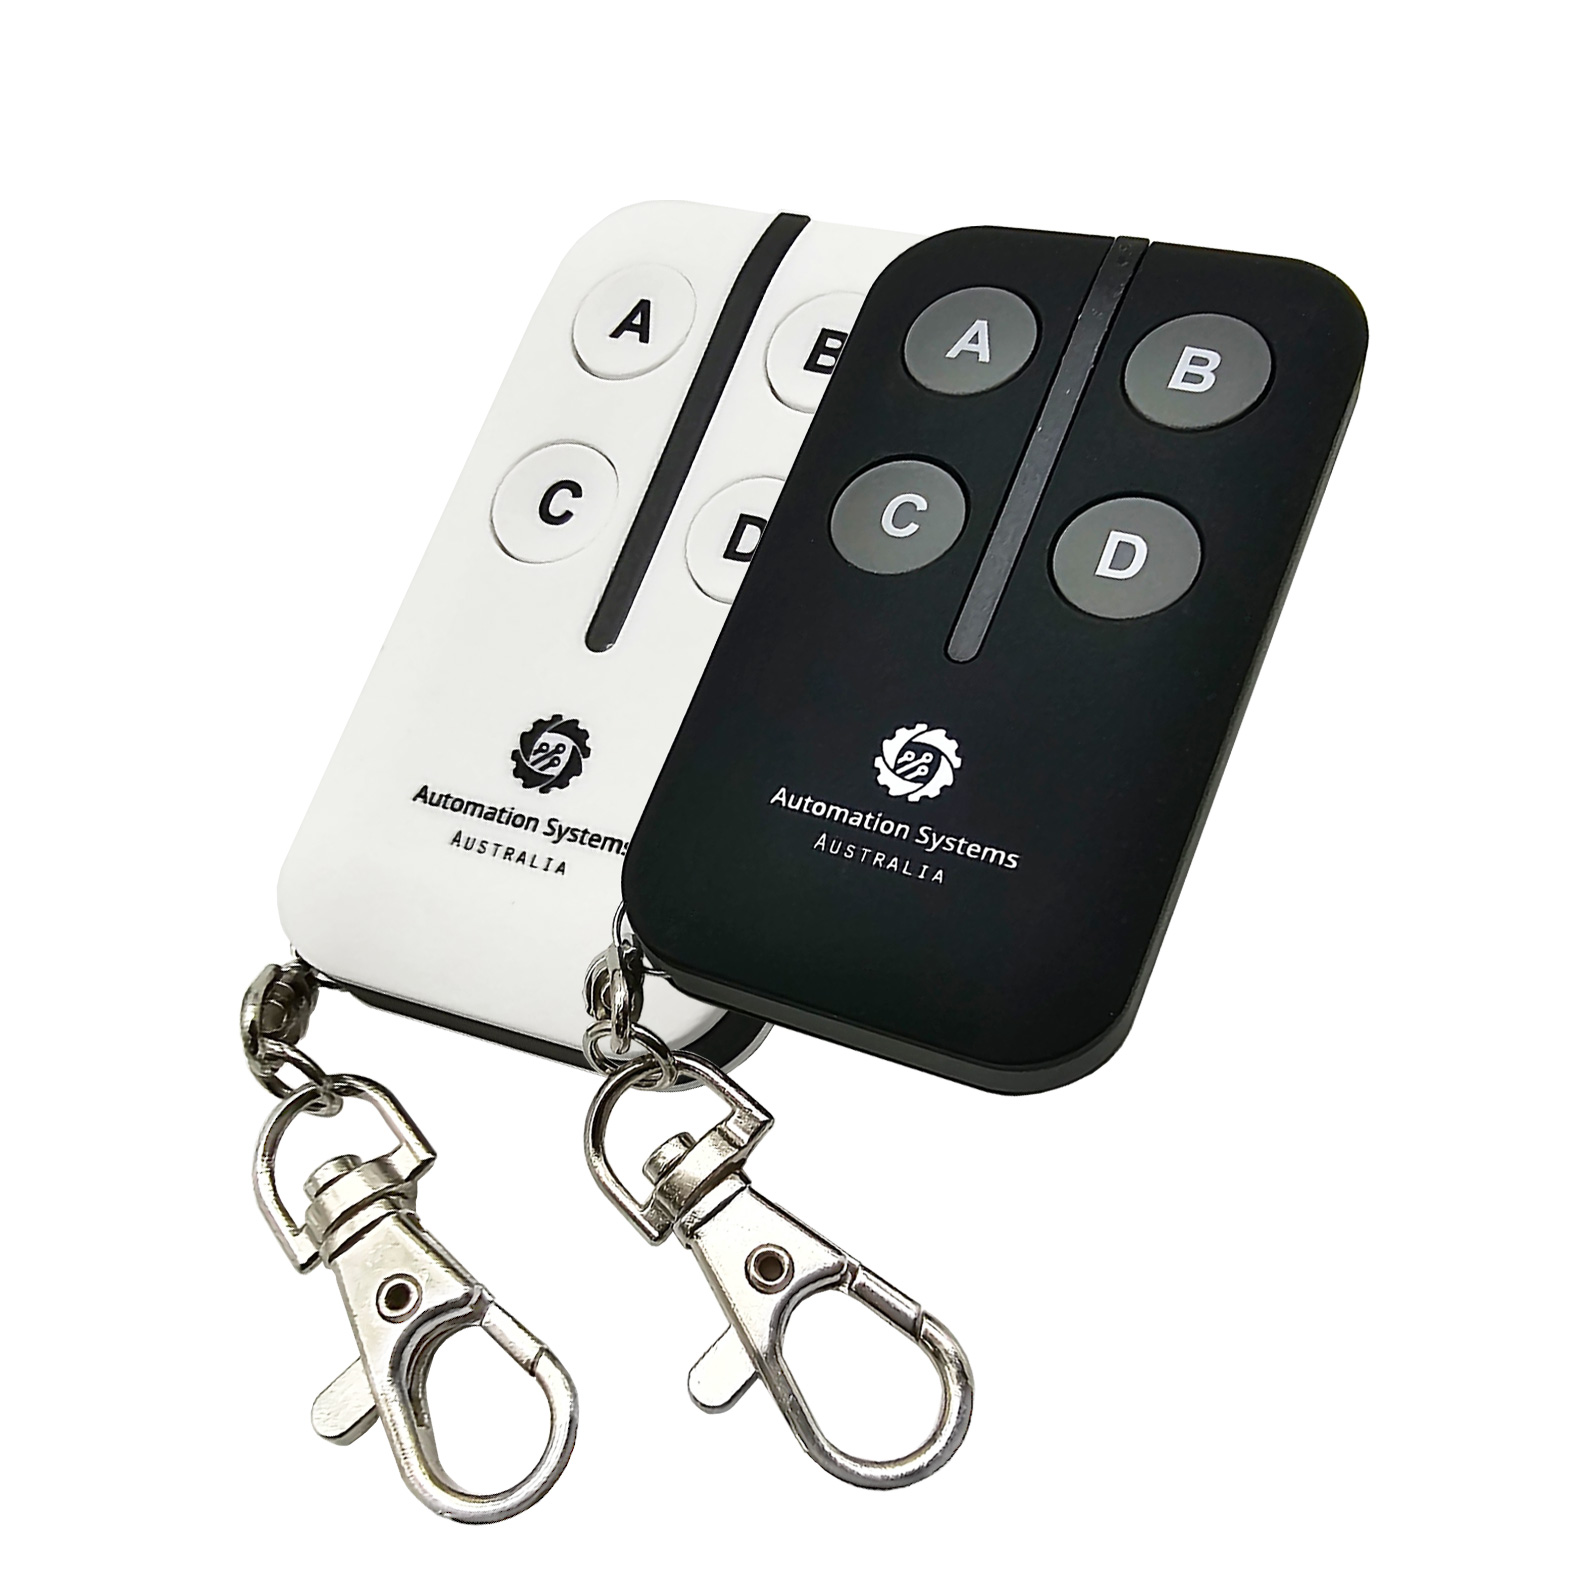 Automation systems Australia keyring remote control for driveway gate